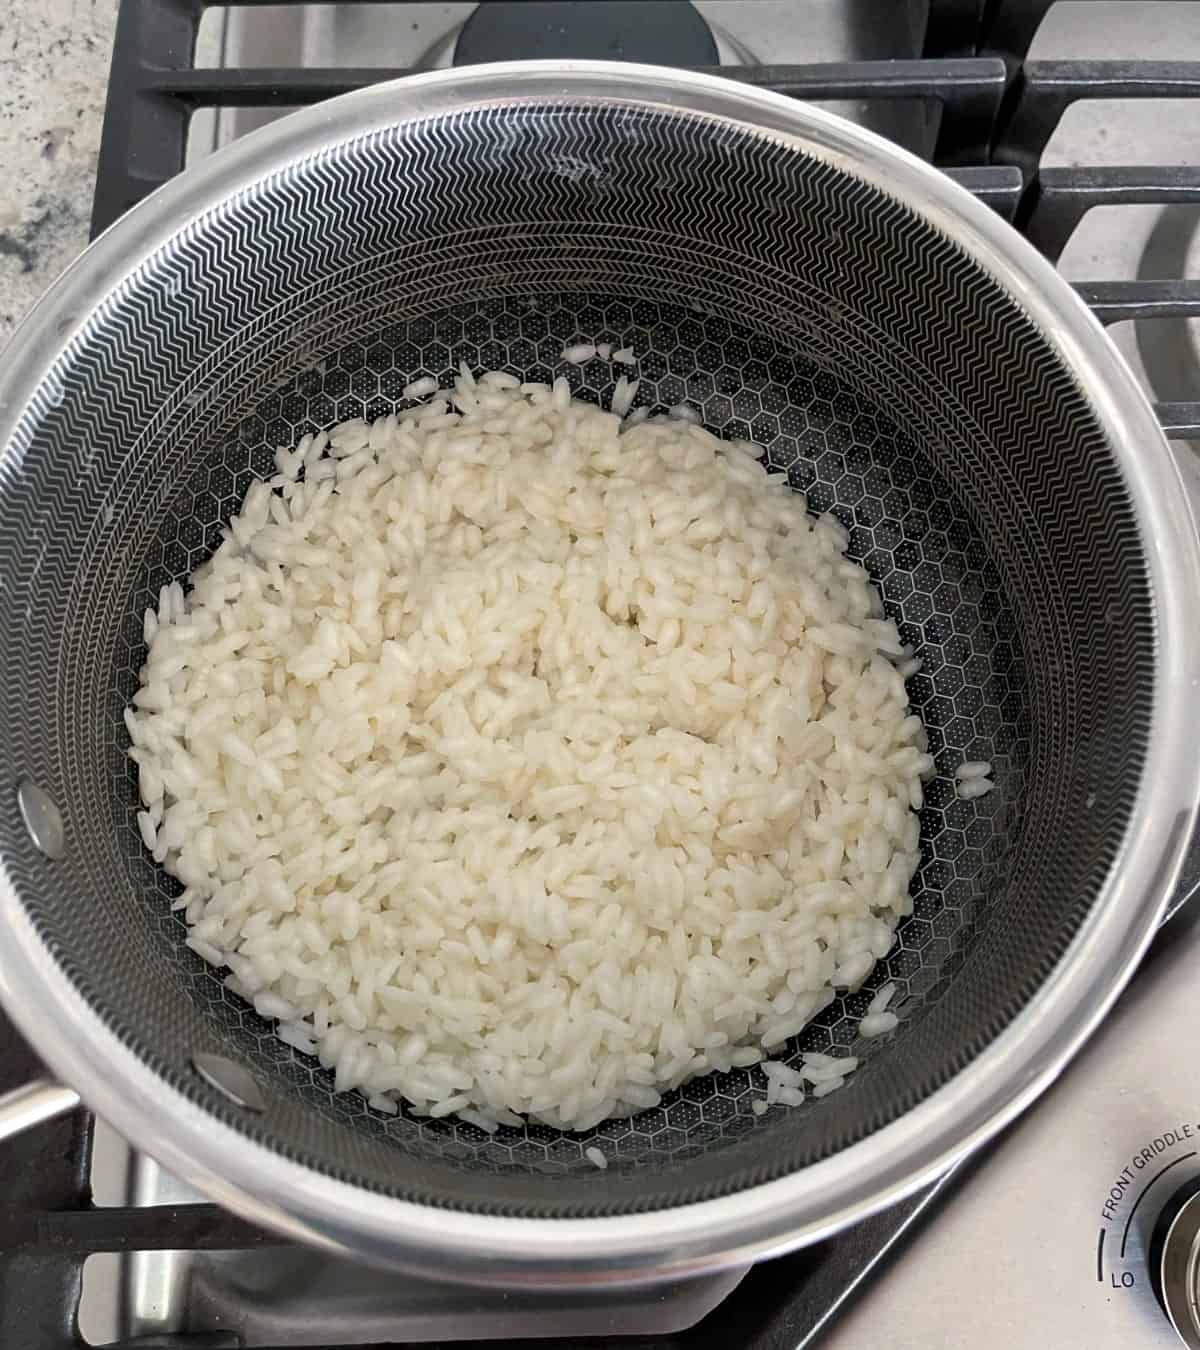 Cooked arborio rice in saucepan on stove top.